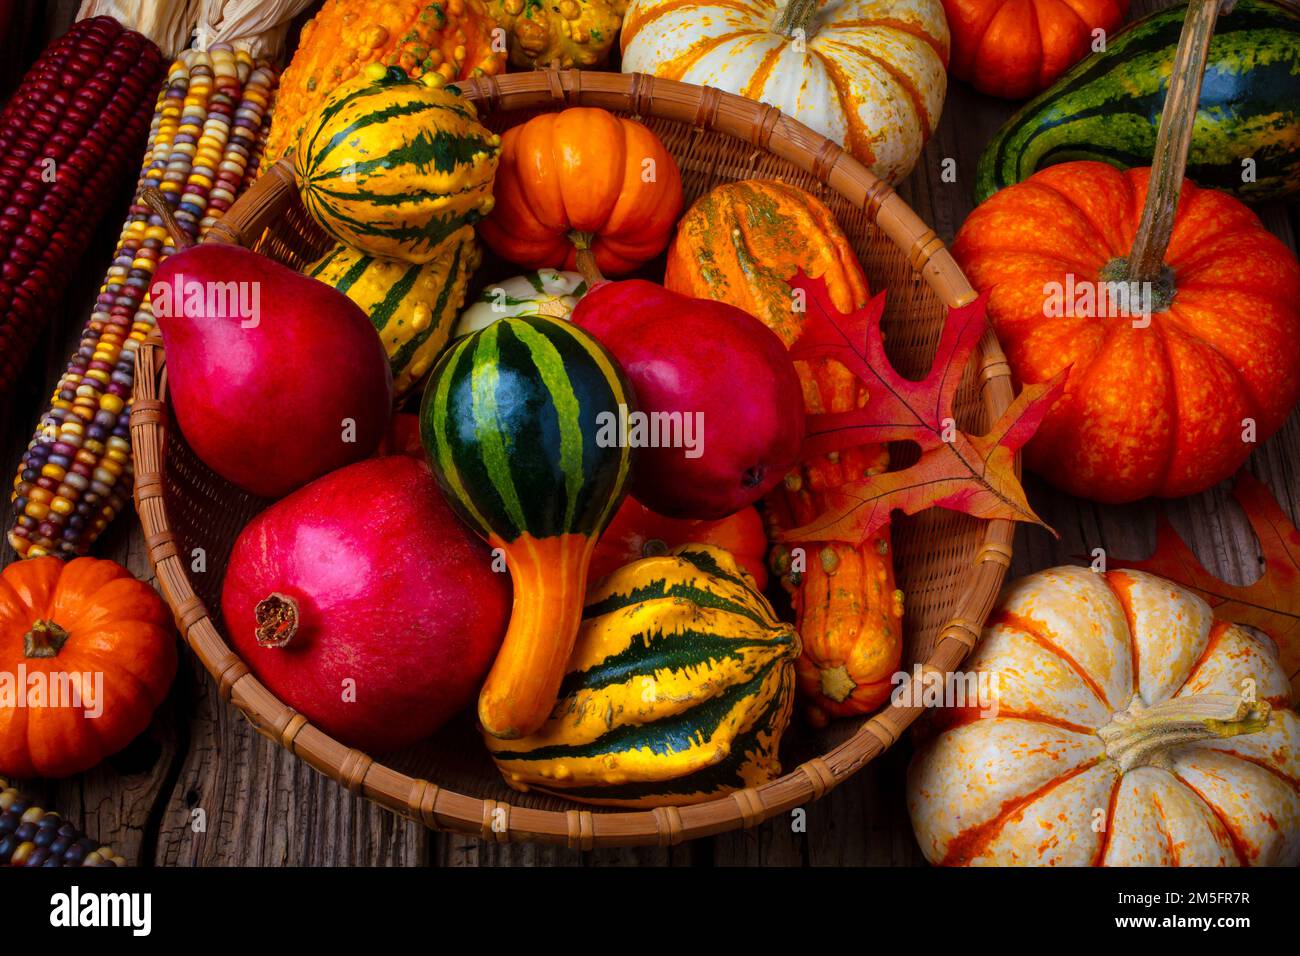 Baskey Full Of Fruit And Gourds Stock Photo